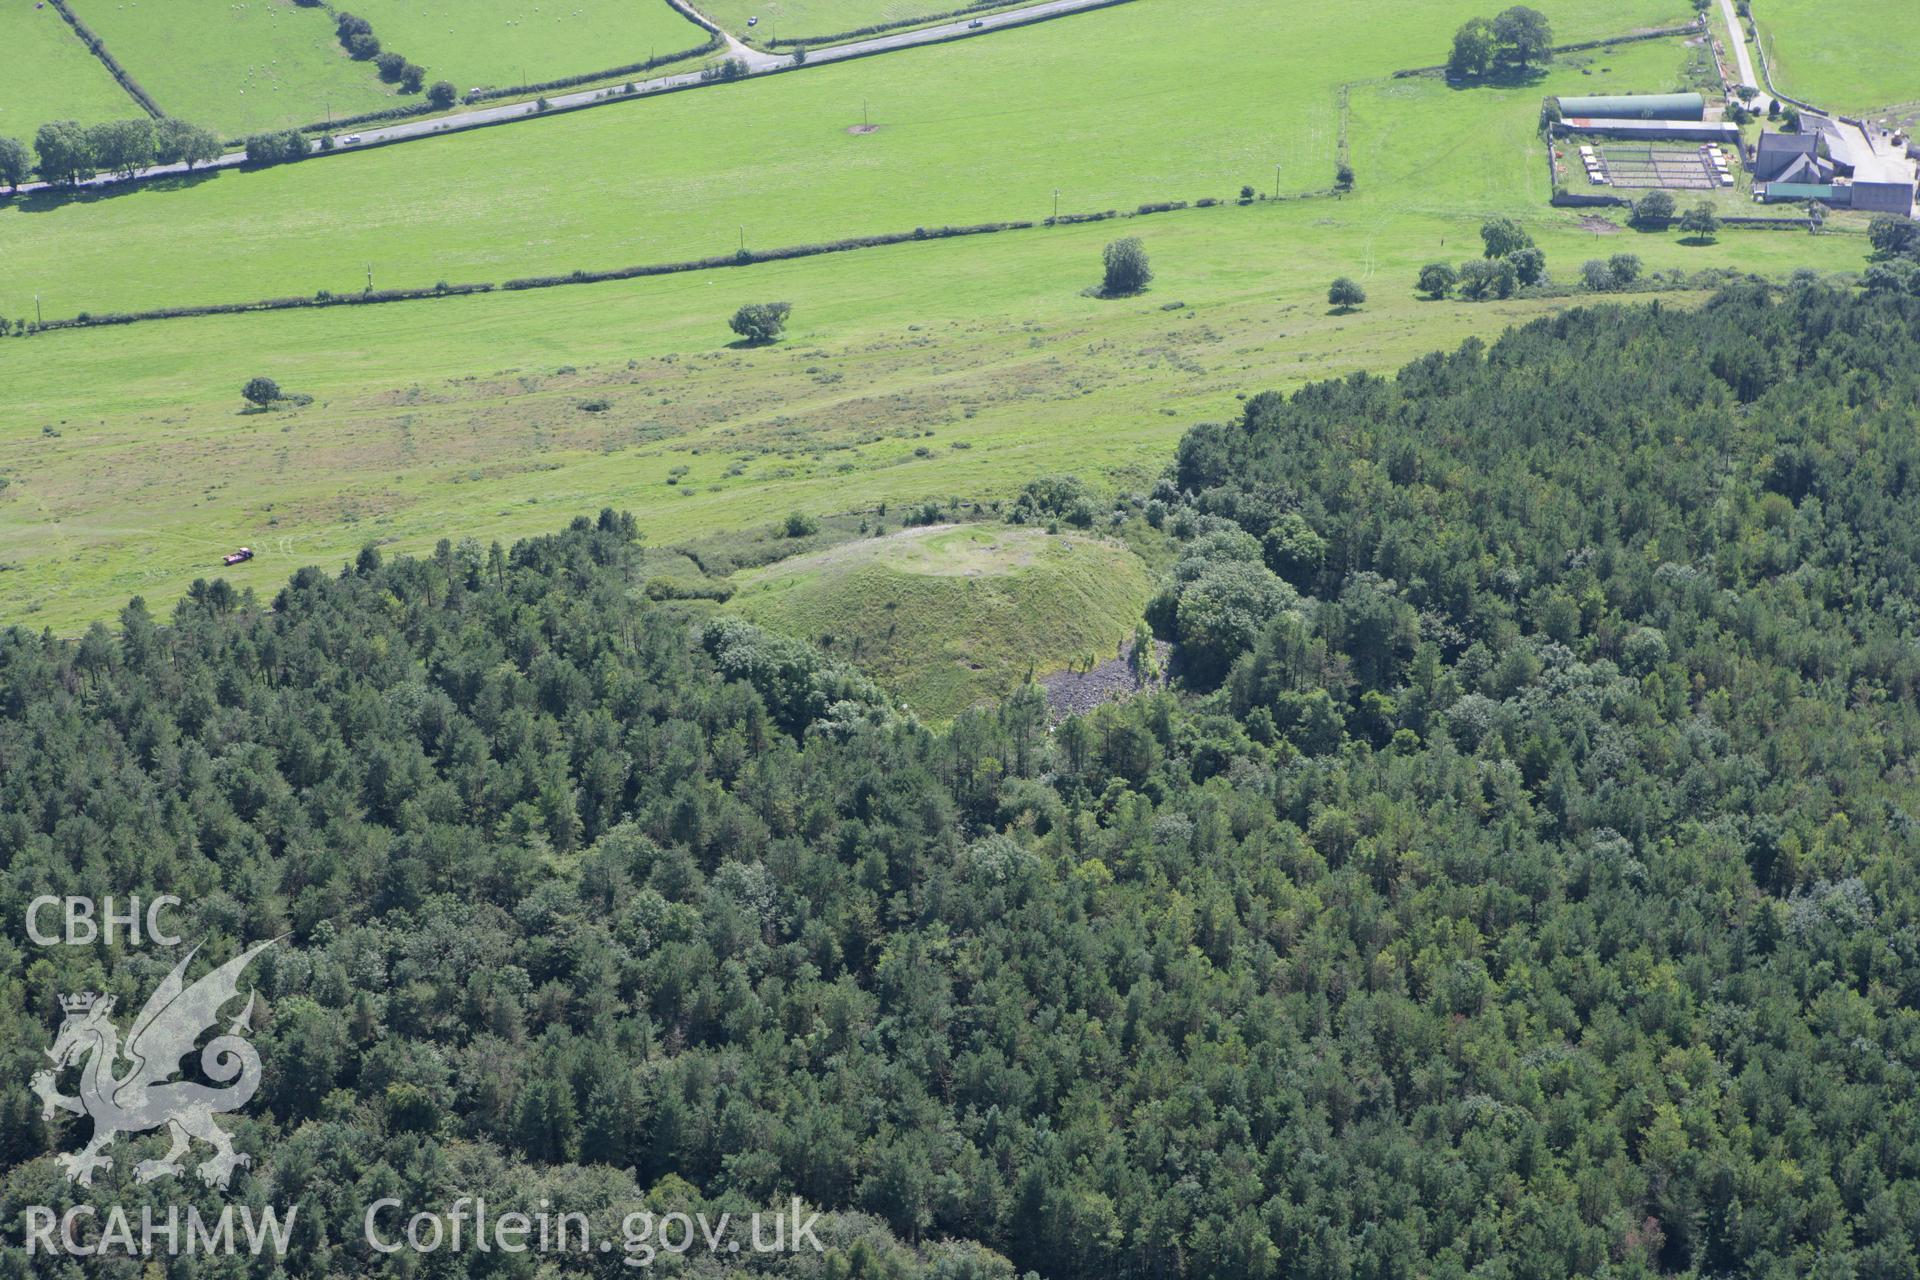 RCAHMW colour oblique aerial photograph of Gop Cairn. Taken on 31 July 2007 by Toby Driver